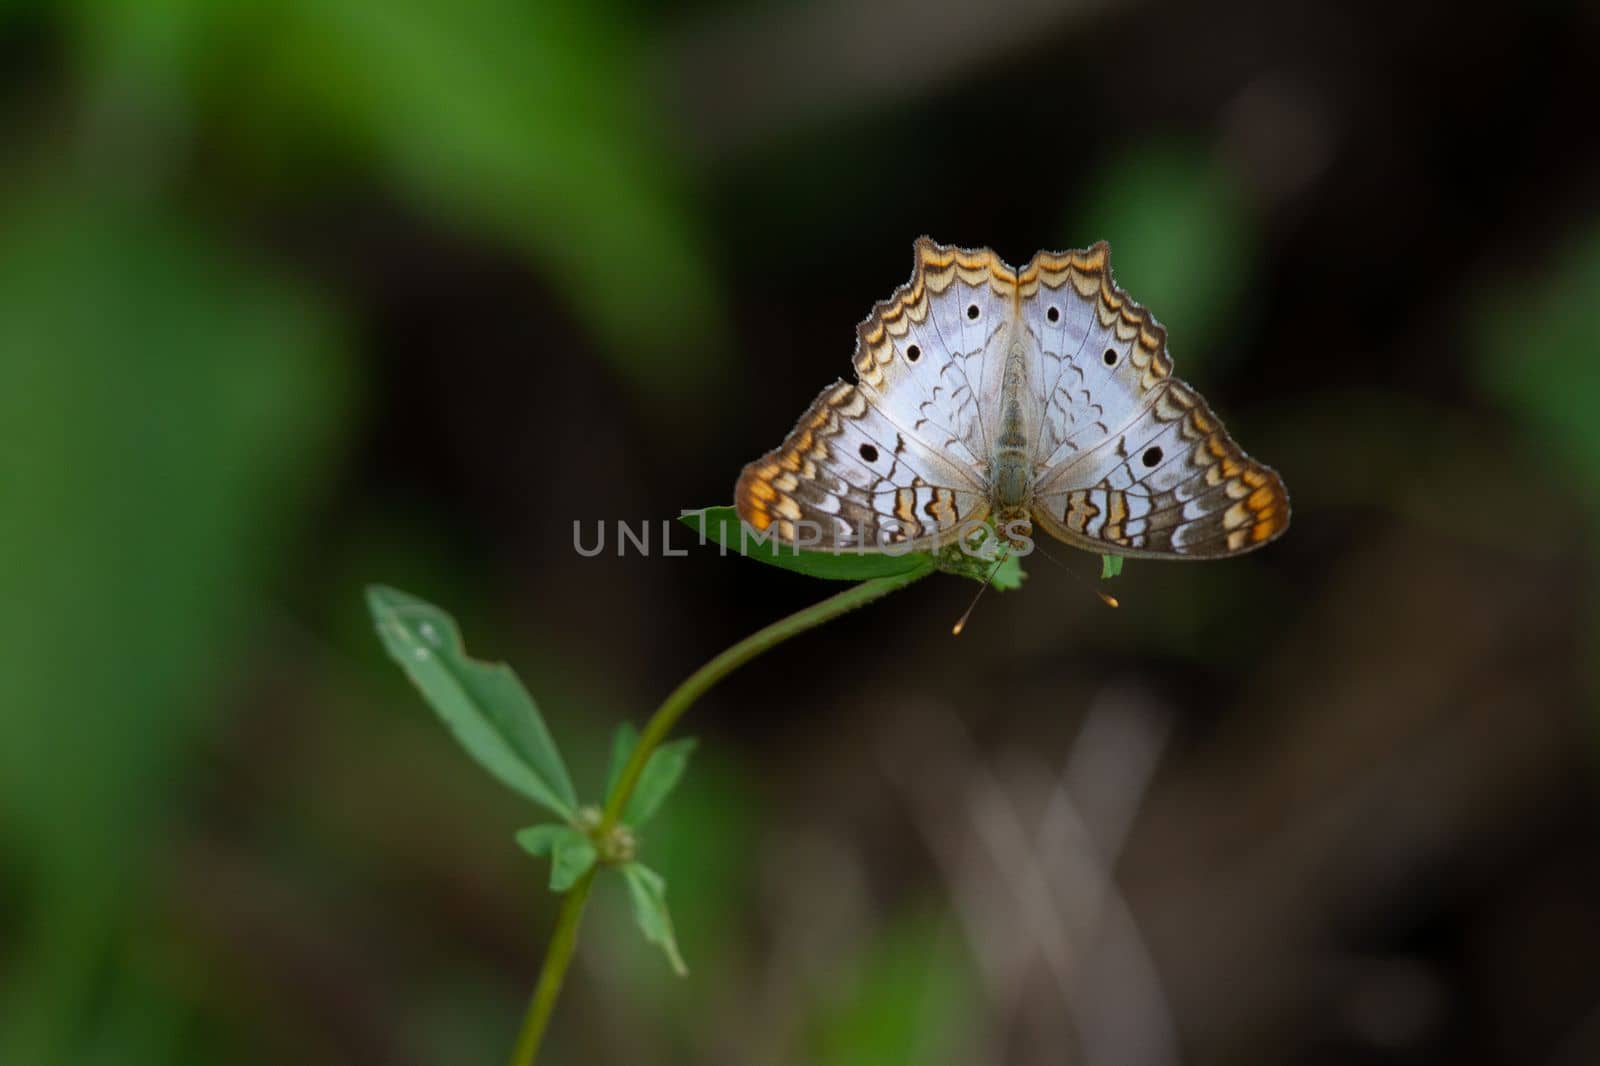 White Peacock Anartia-jatrophae butterfly that landed on a small plant, near Everglades, Florida, USA